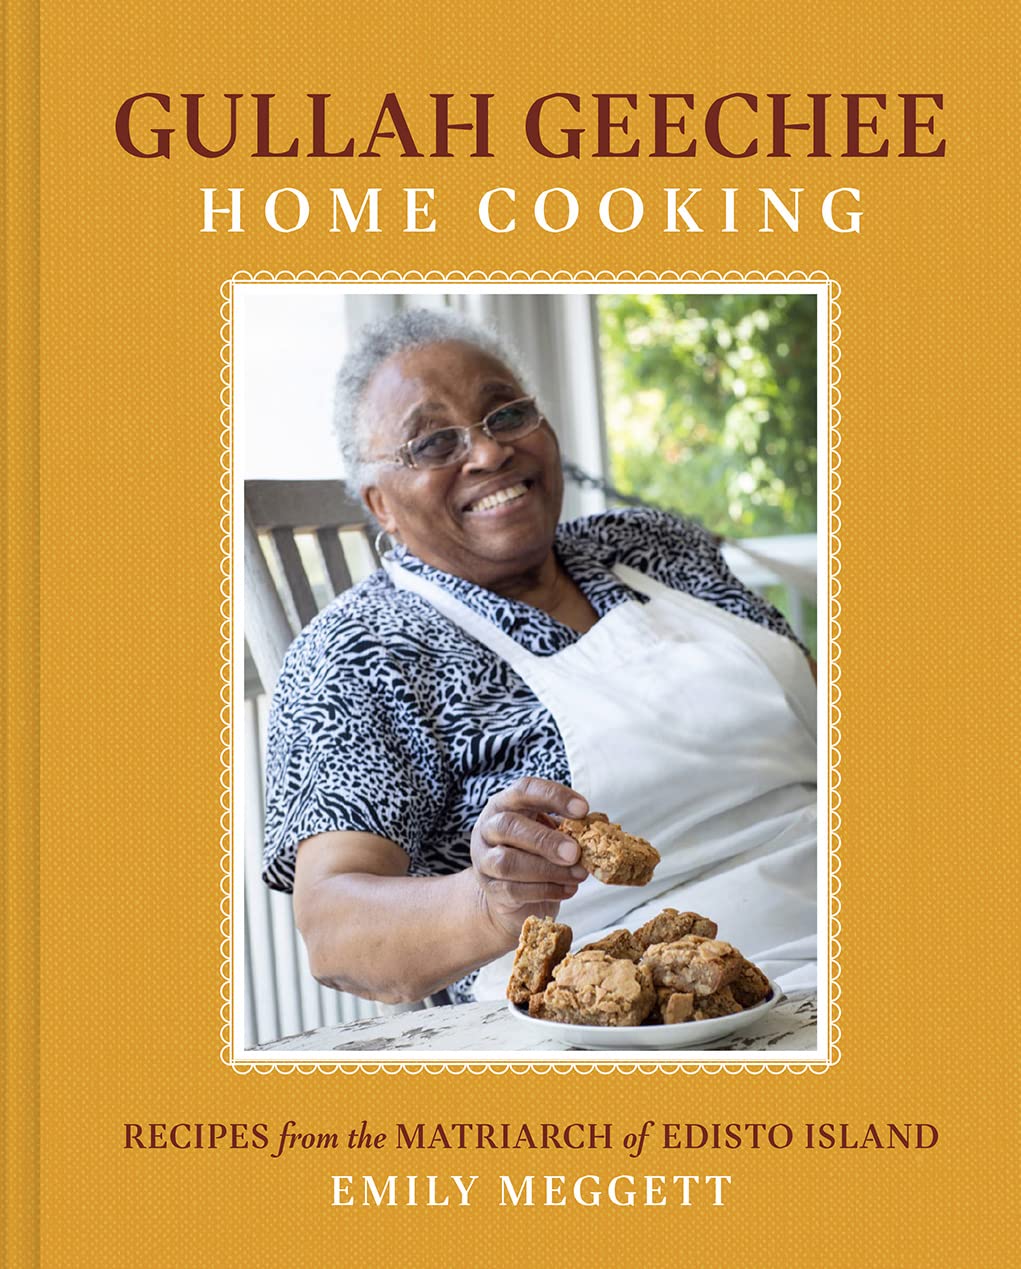 Gullah Geechee Home Cooking: Recipes from the Matriarch of Edisto Island (Emily Meggett)